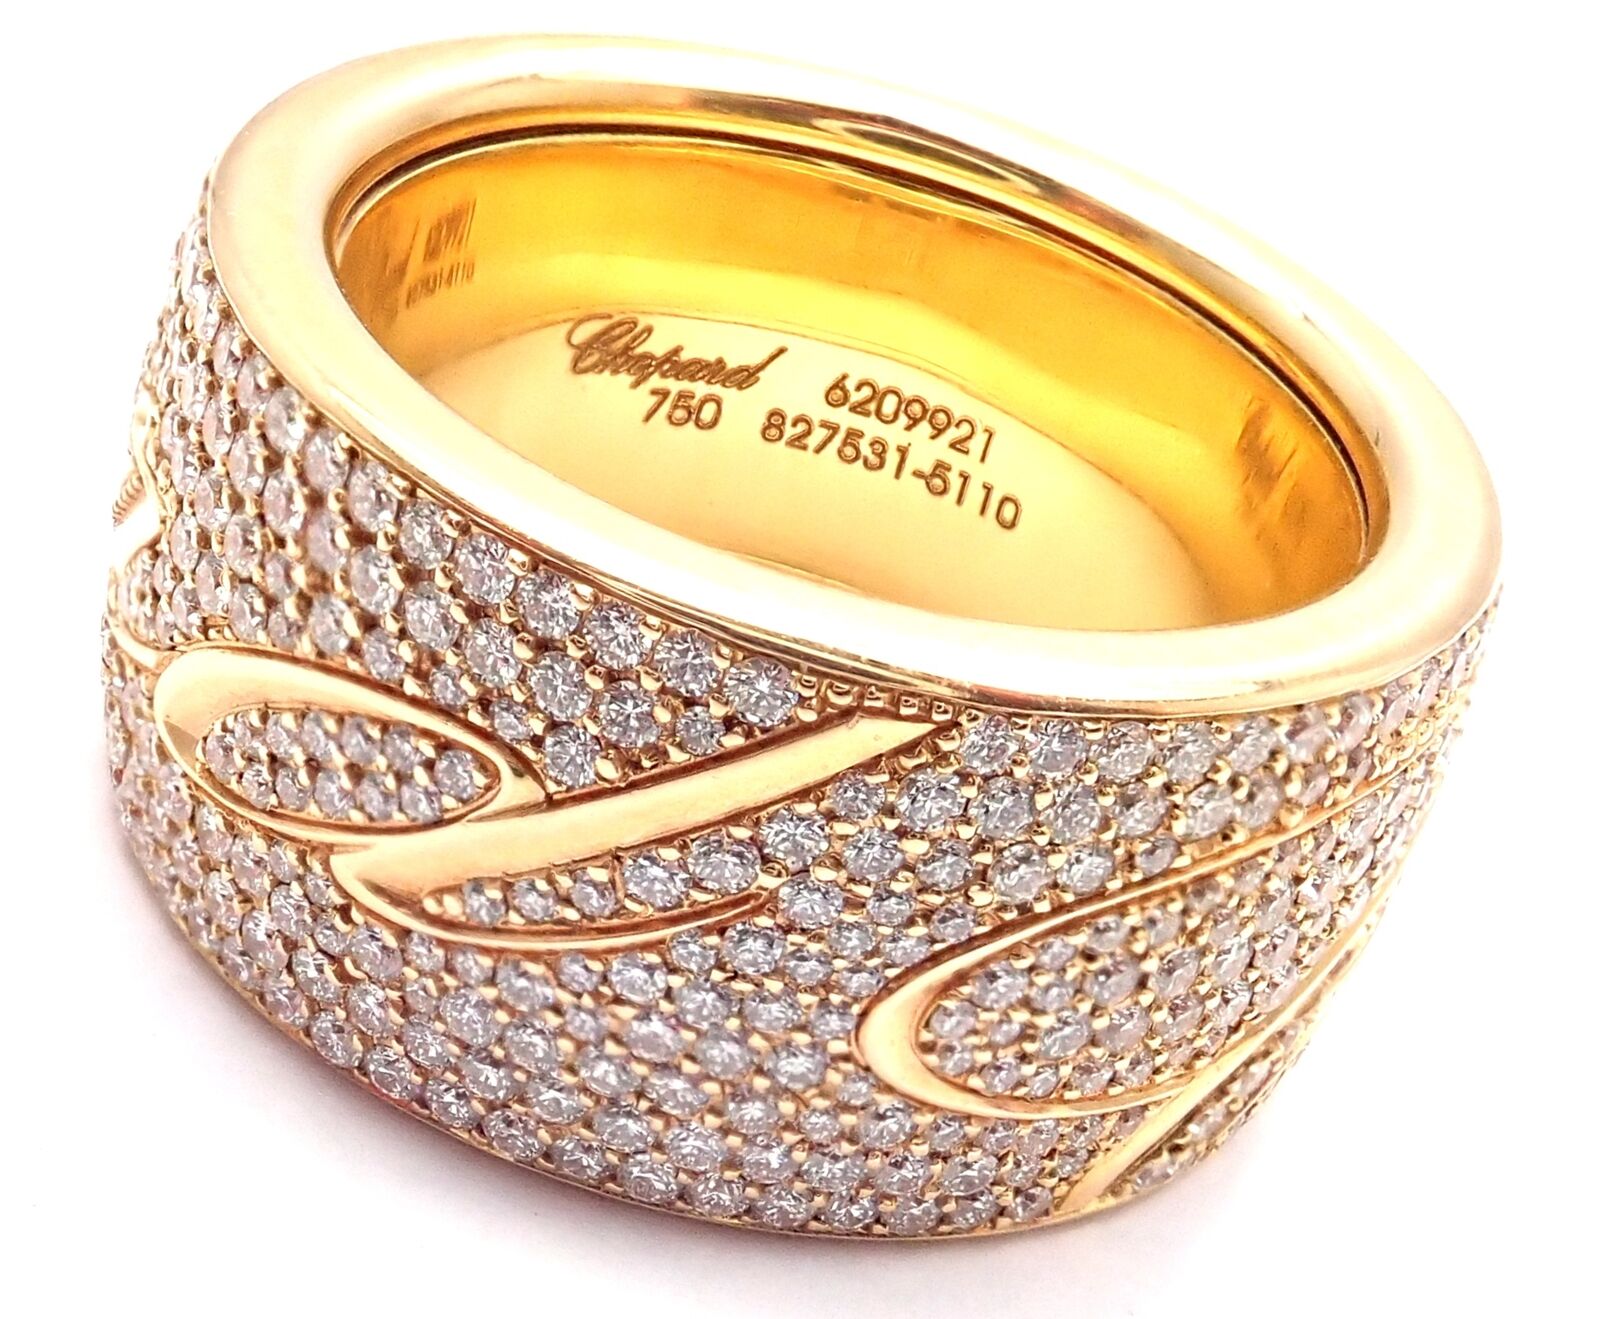 Color Blossom Signet Ring, Yellow Gold, White Gold And PavÃ© Diamond -  Categories Q9M83B